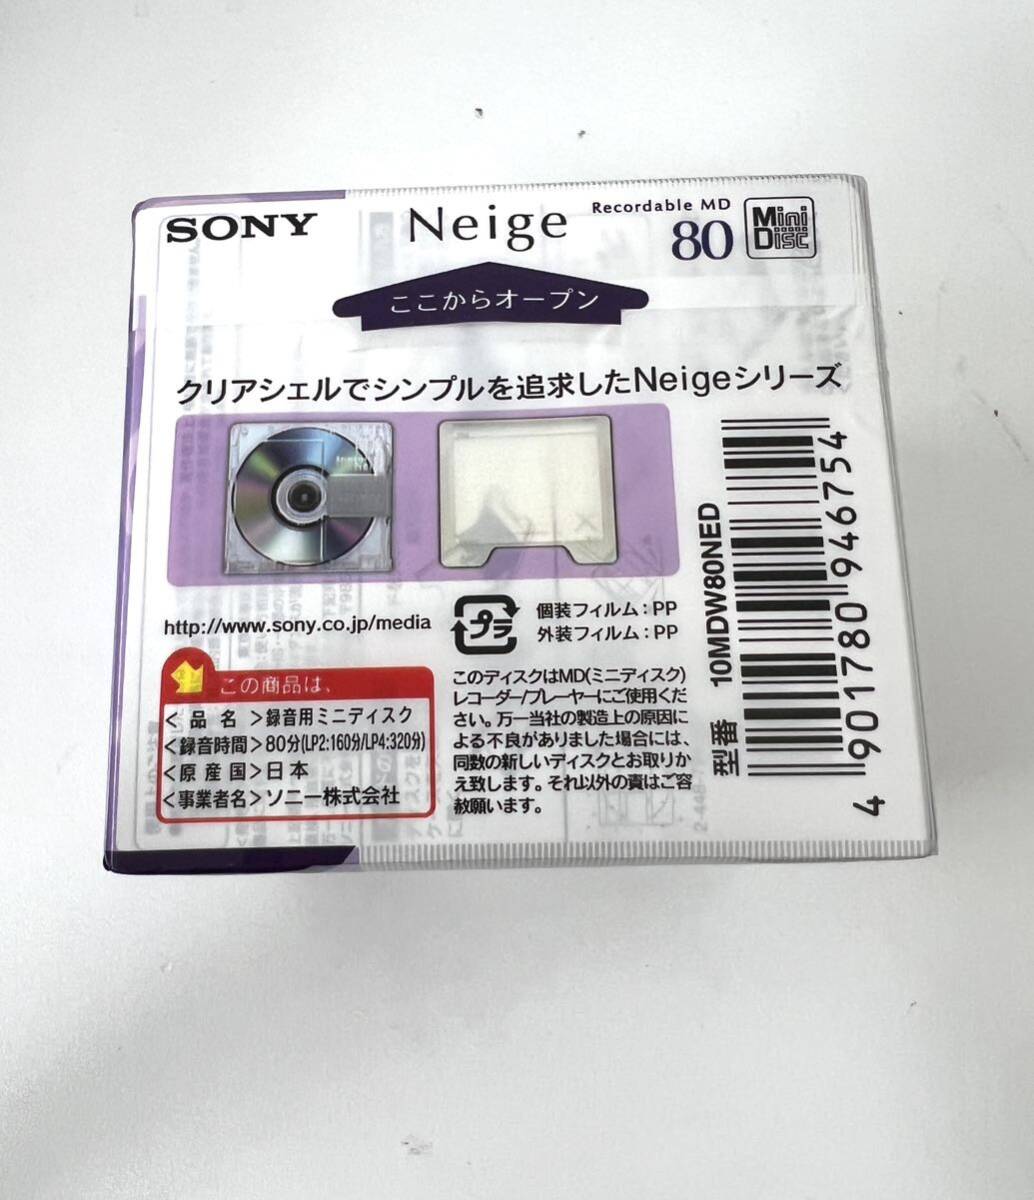 0 unused unopened SONY Neige 80 35 sheets Mini Disc MD recording for Mini disk 80 minute Sony MD disk 